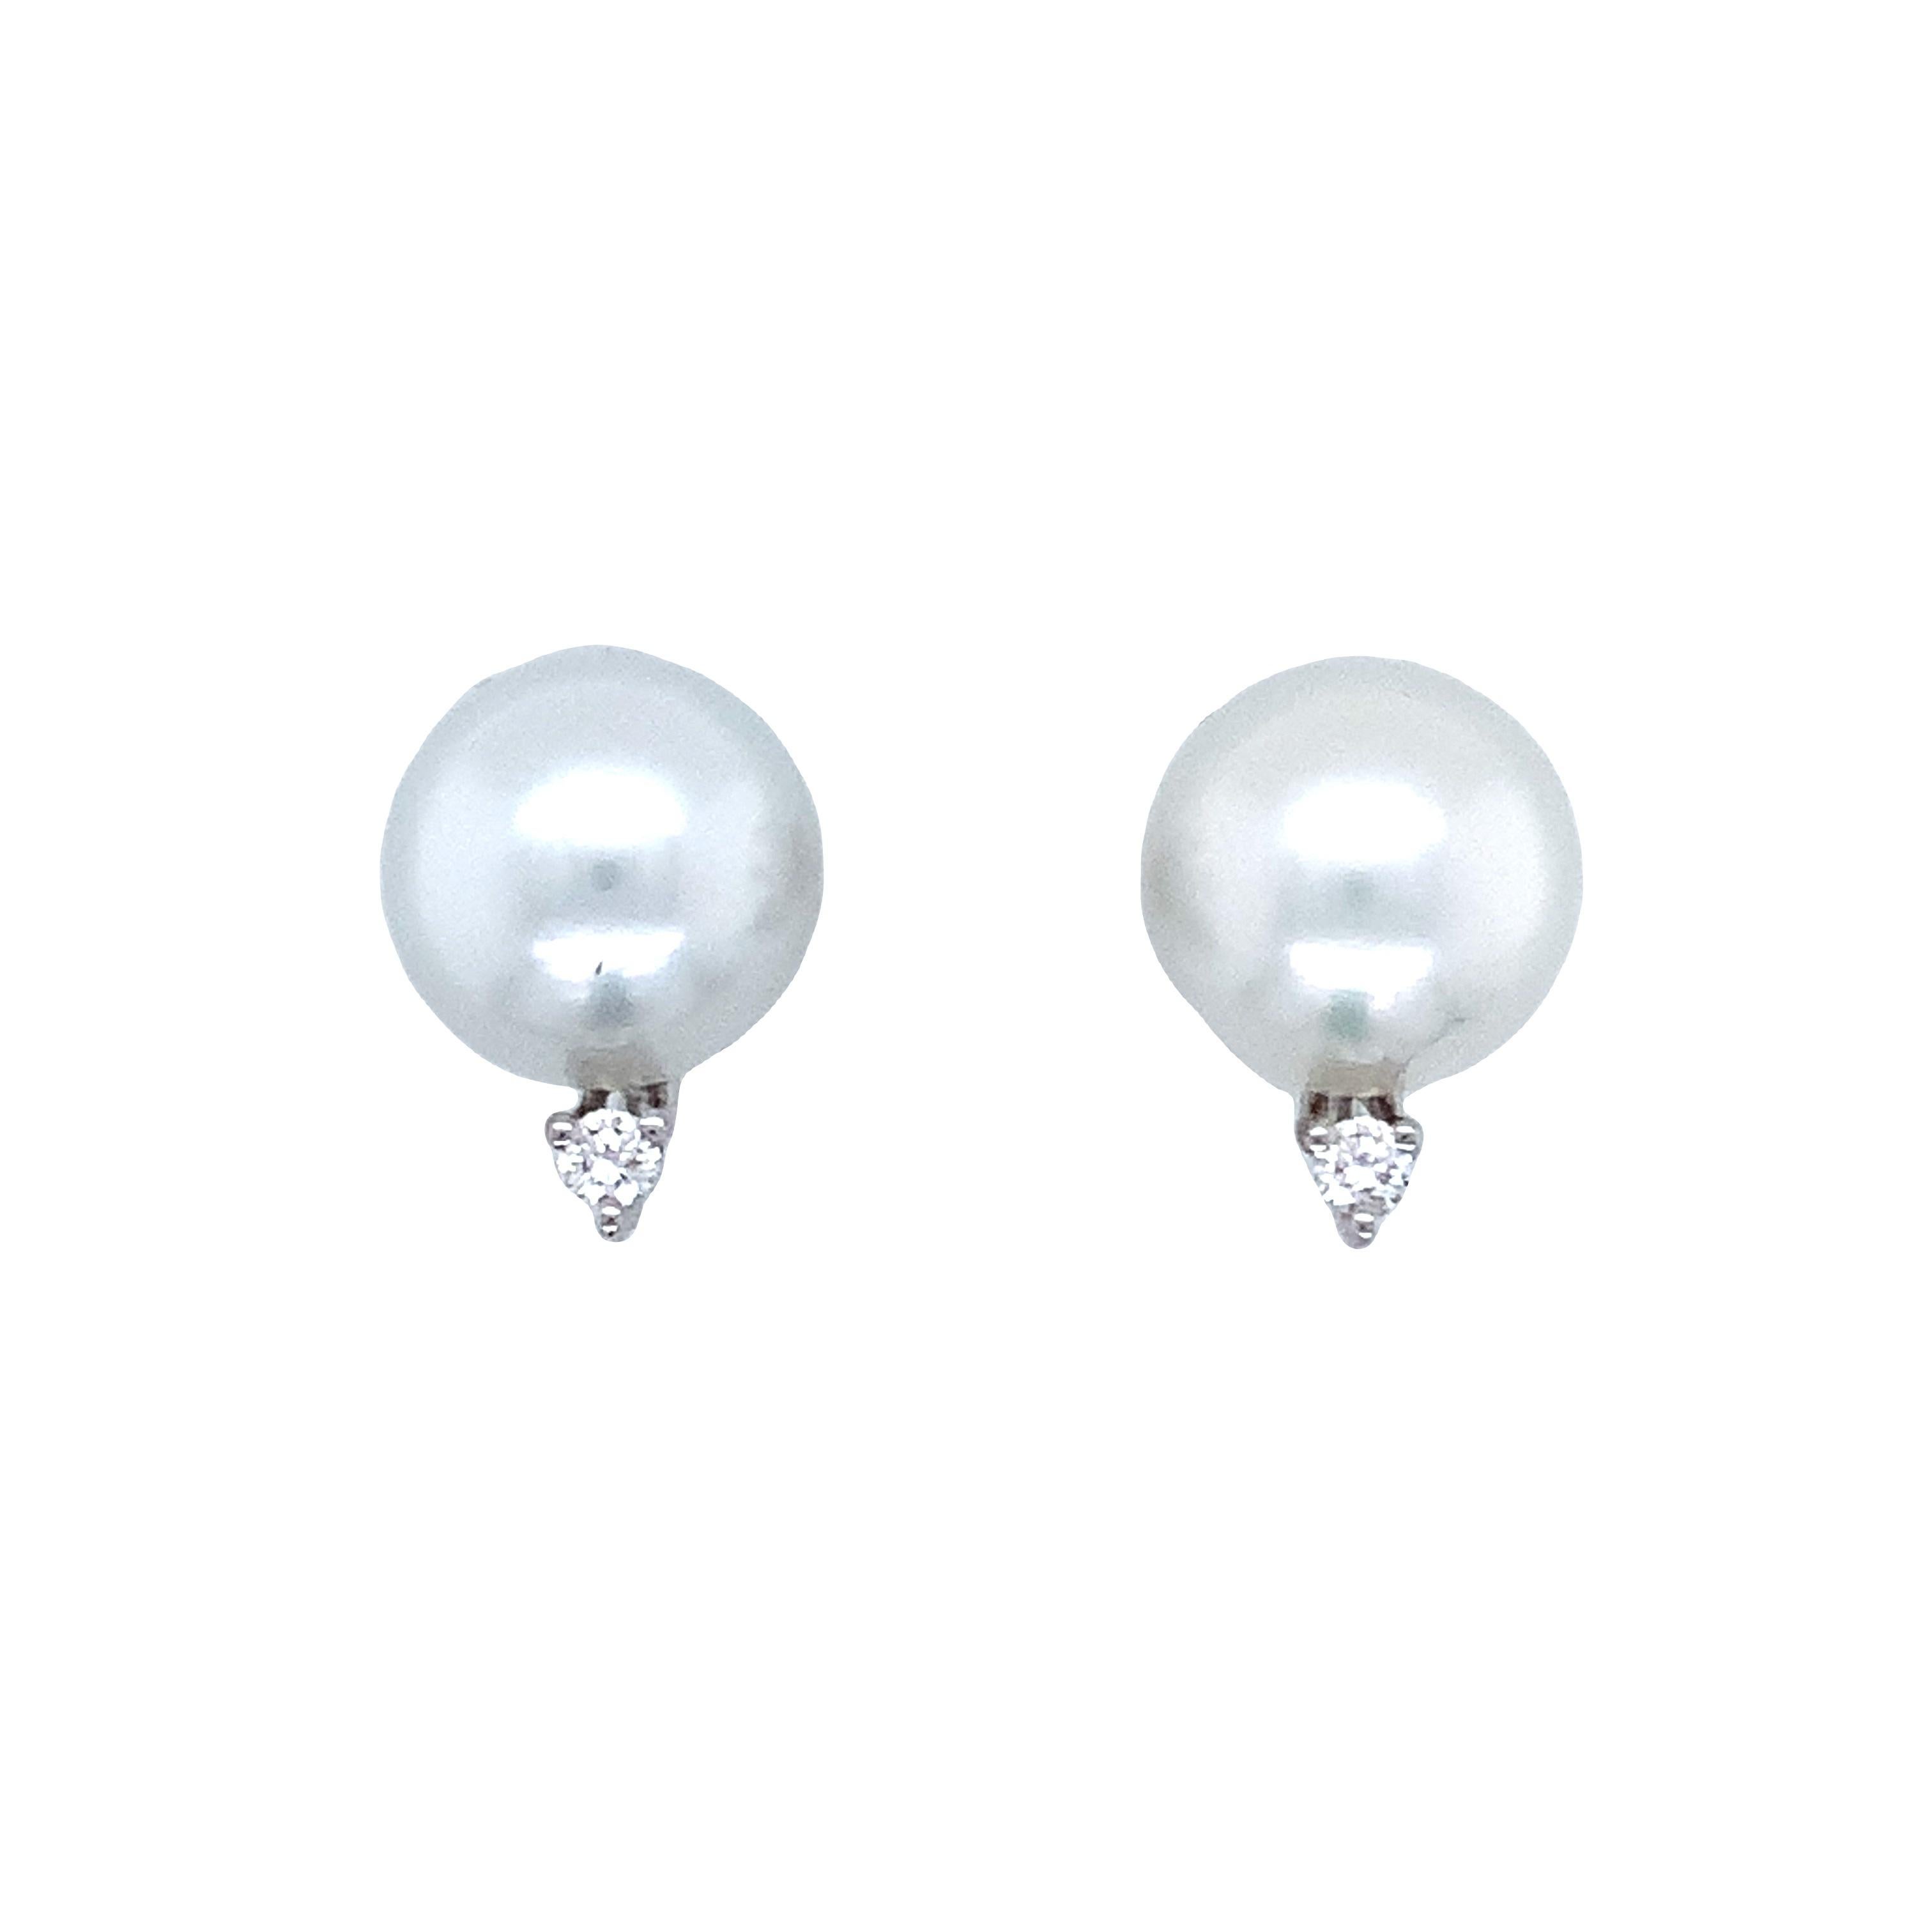 ASBA Collection South Sea Pearl and Diamond Stud Earring set in 14K White Gold

Additional Information:
2 Round Diamond=0.09 ct t.w. Brilliant Cut G in Color SI 1 in Clarity Very Good Make and Polish.
2 South Sea Pearl 10-11mm Round  White Body